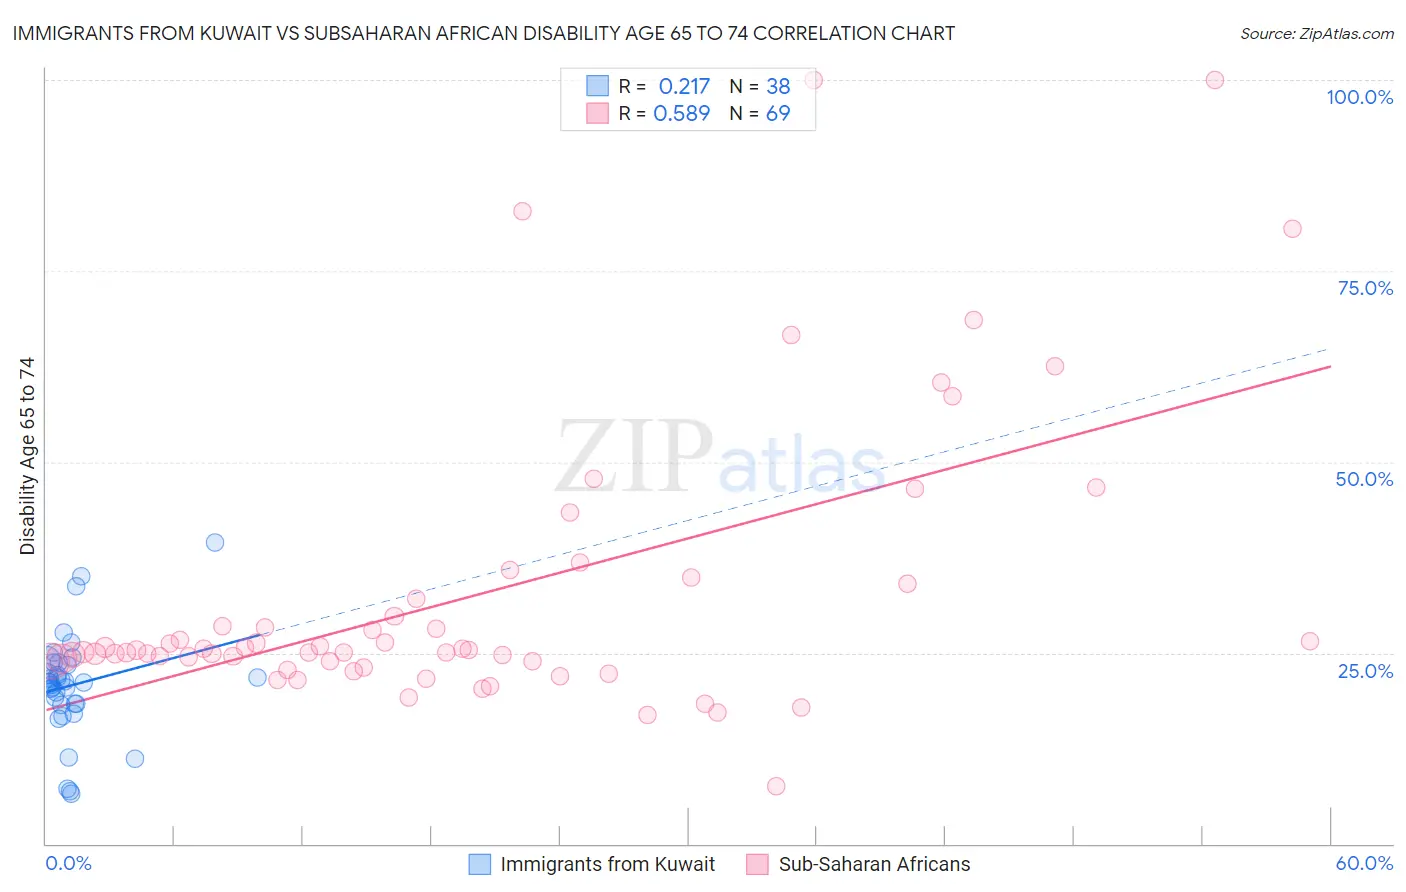 Immigrants from Kuwait vs Subsaharan African Disability Age 65 to 74